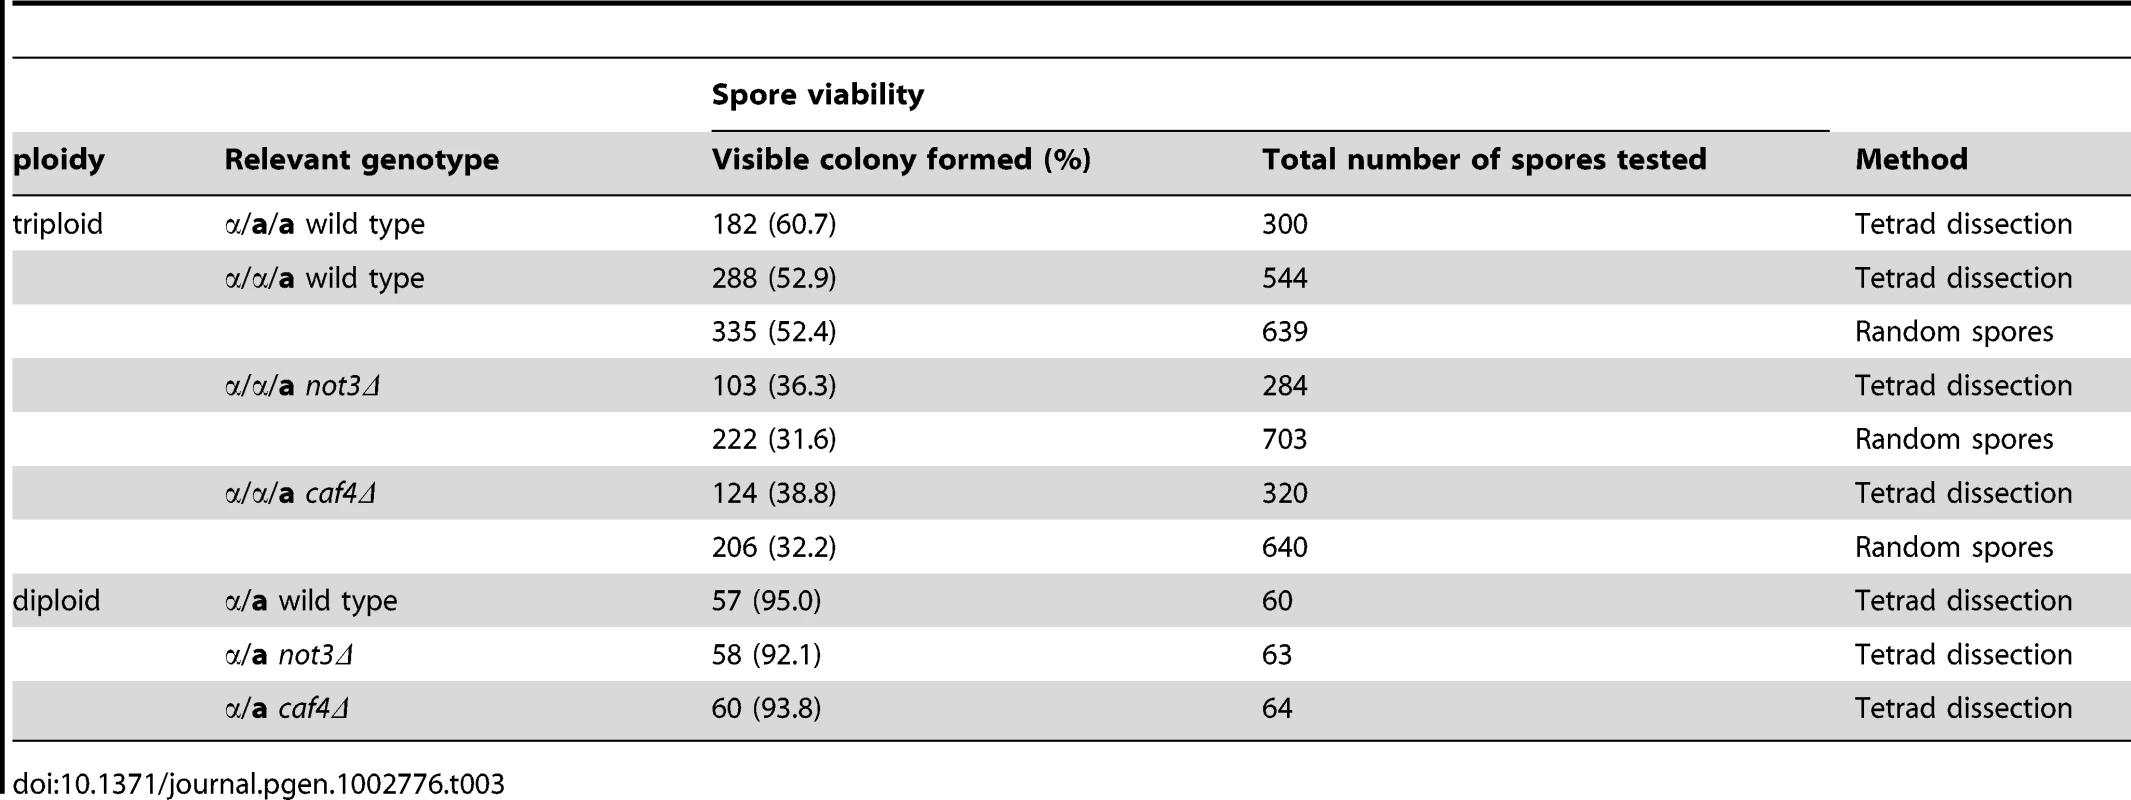 Viability of spores produced in triploid cells in &lt;i&gt;S. cerevisiae&lt;/i&gt;.